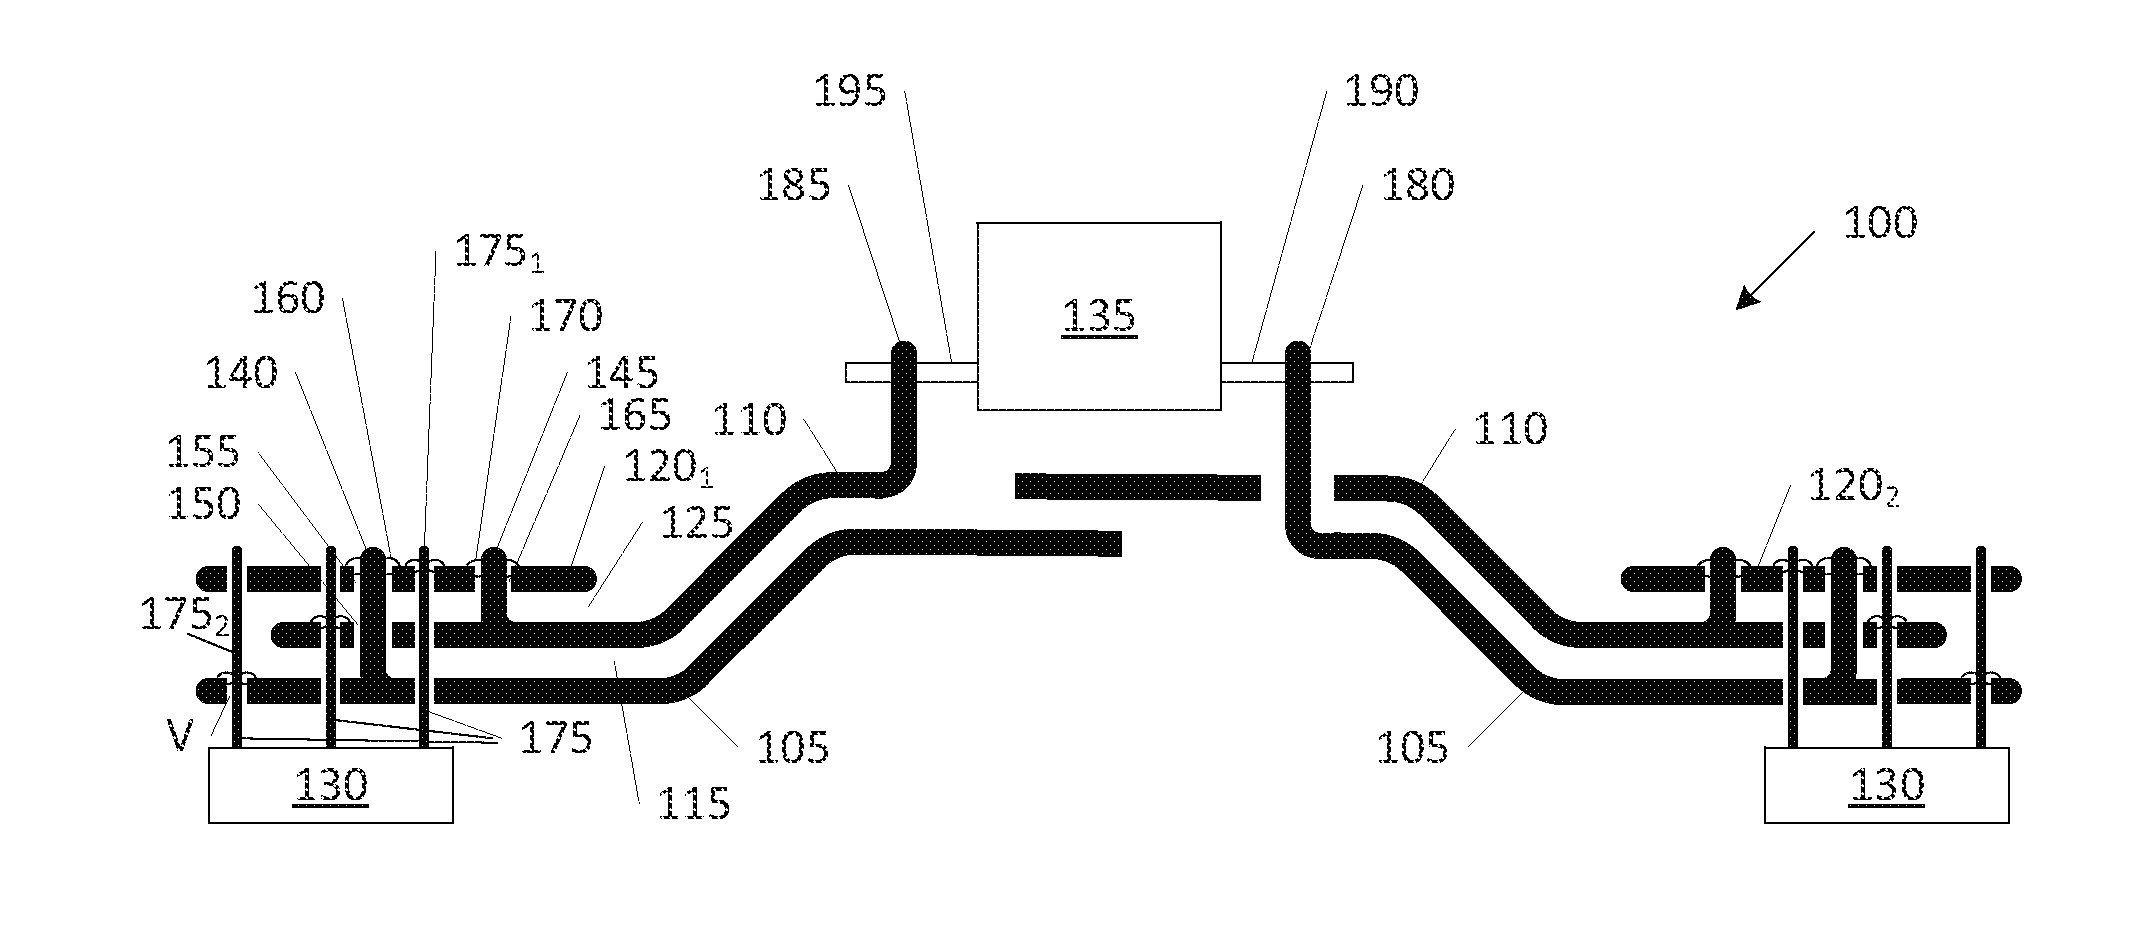 Power electronics interconnection for electric motor drives